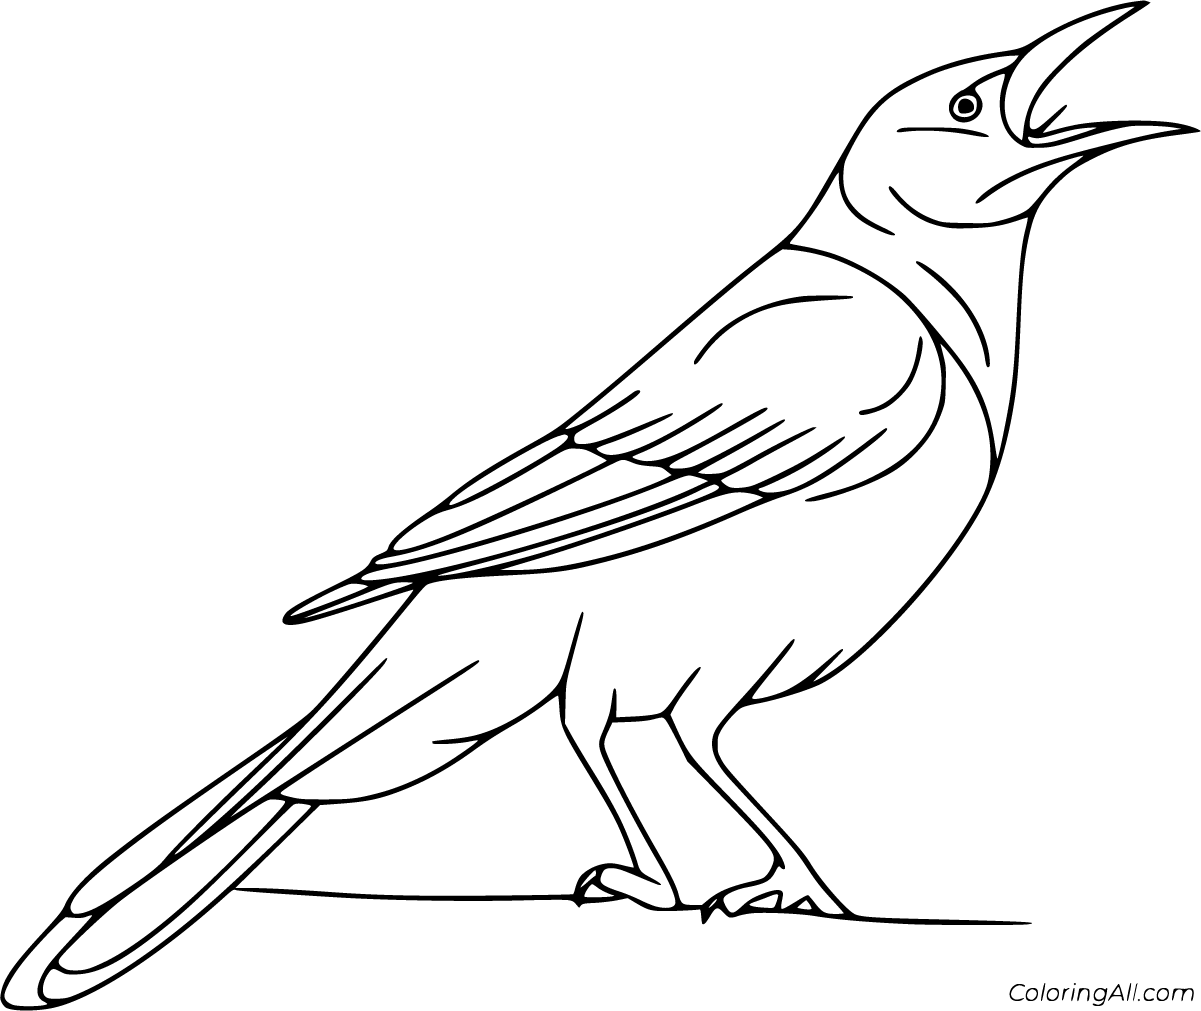 Crow Coloring Pages - ColoringAll